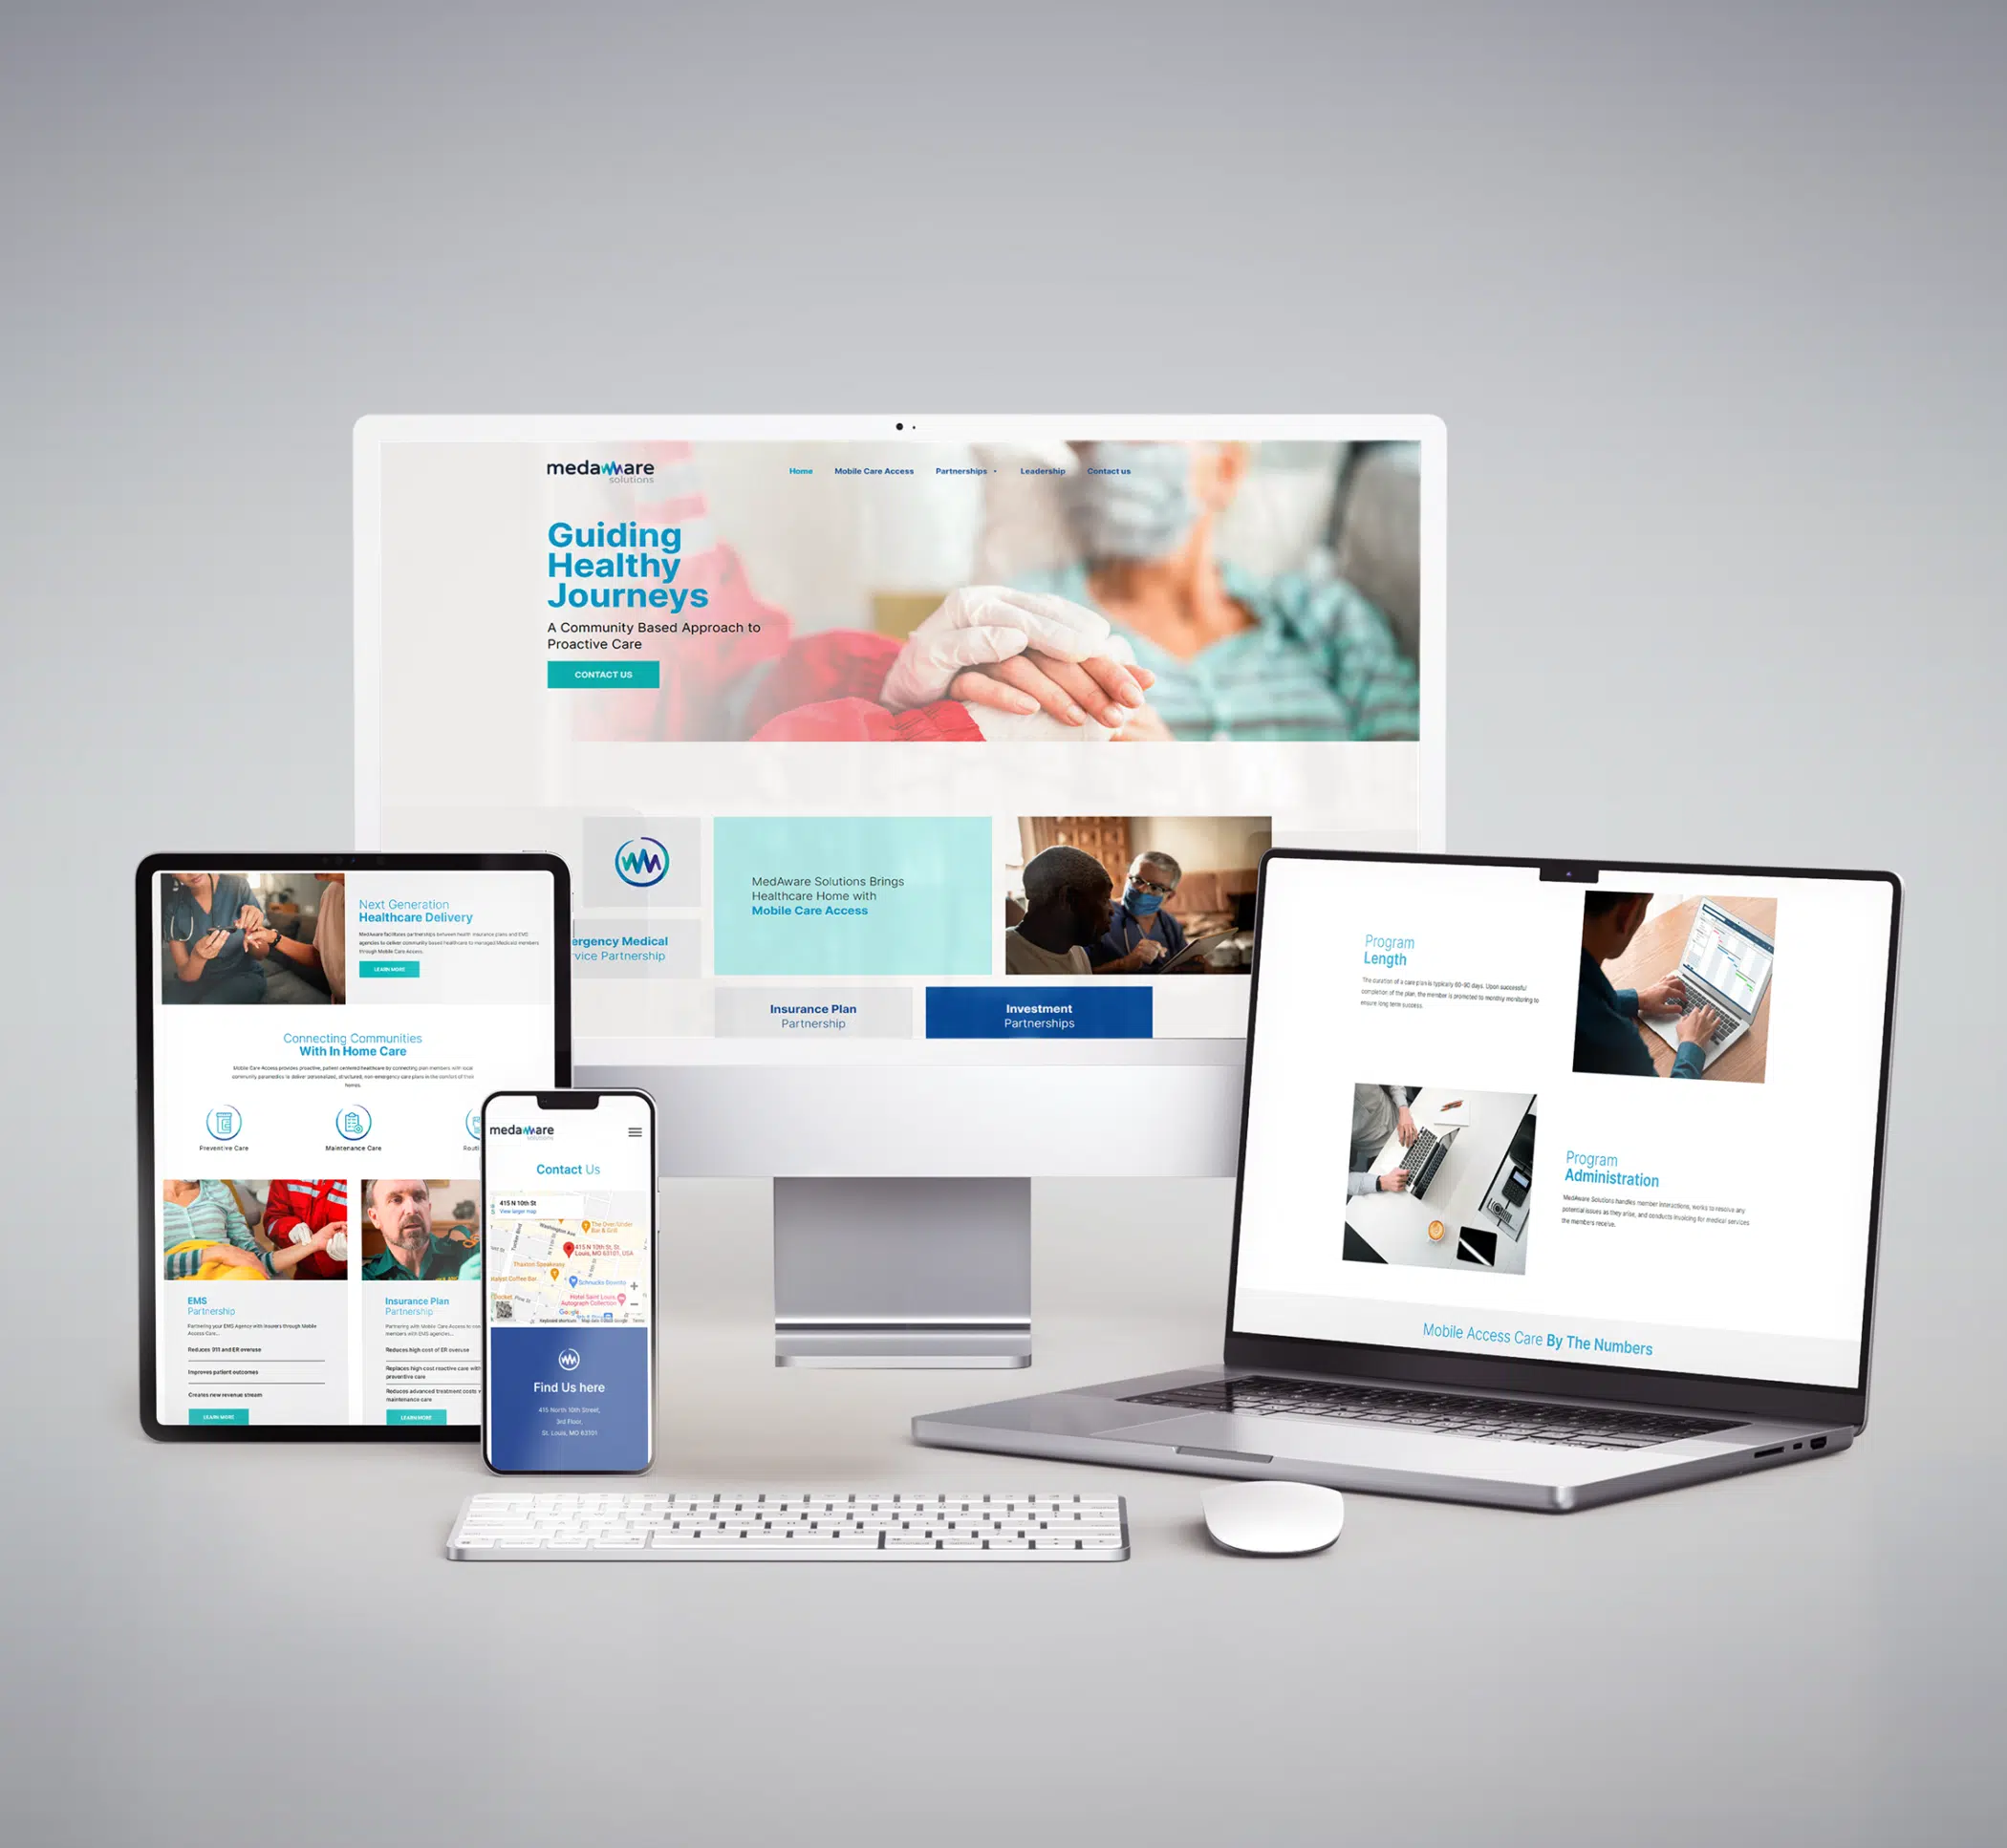 mock up view of electronic devices with client's web design pages - 2